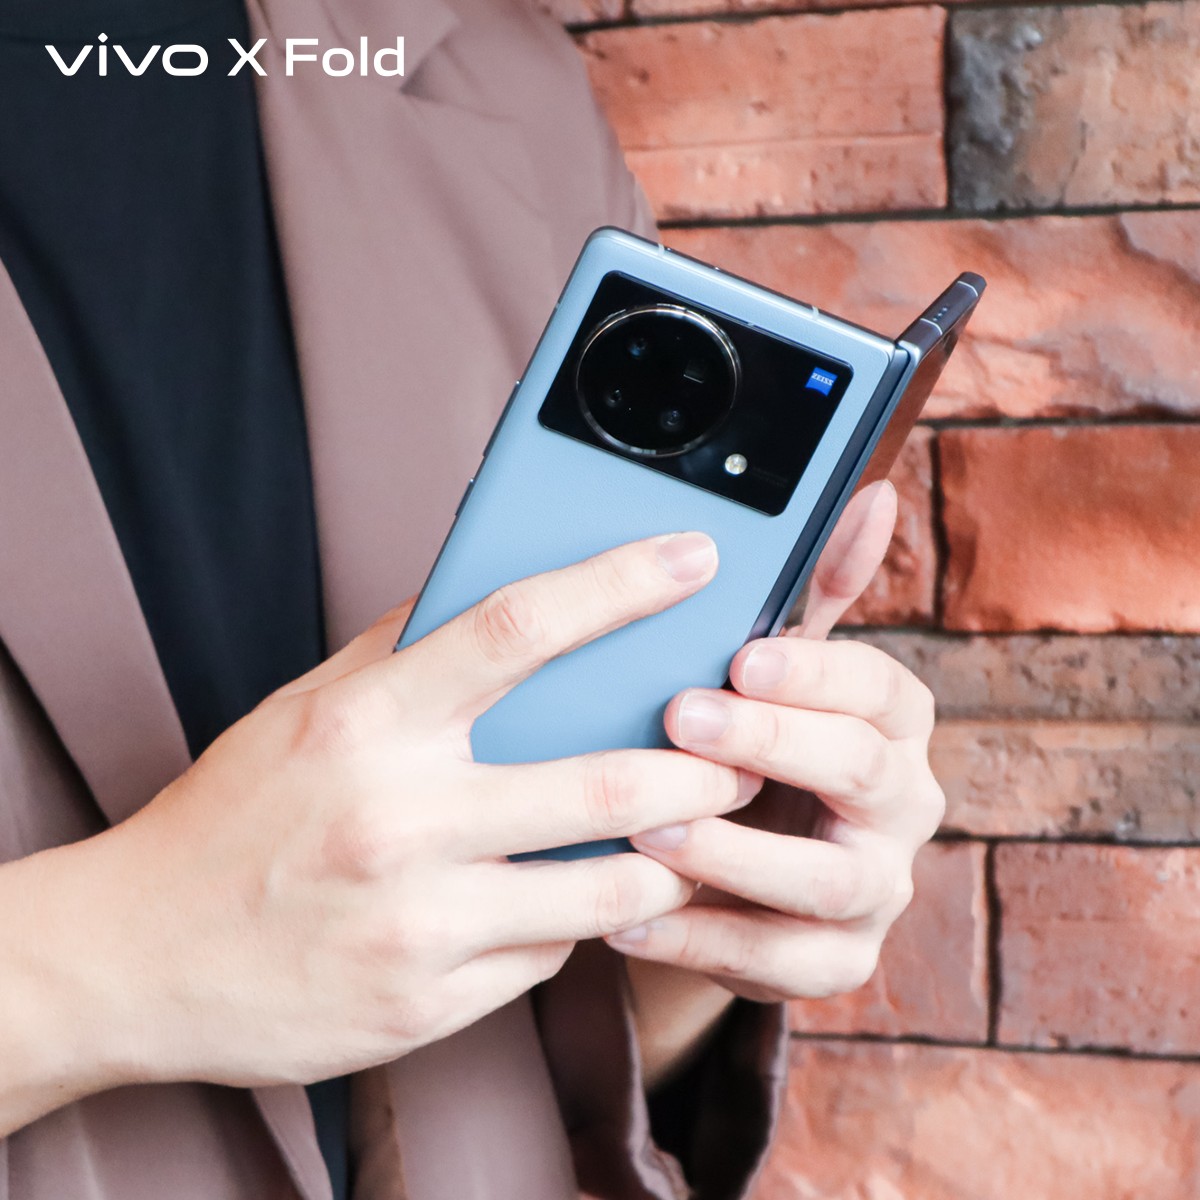 vivo Malaysia Brings the ‘Joy of Humanity’ with its First Foldable Phone – vivo X Fold